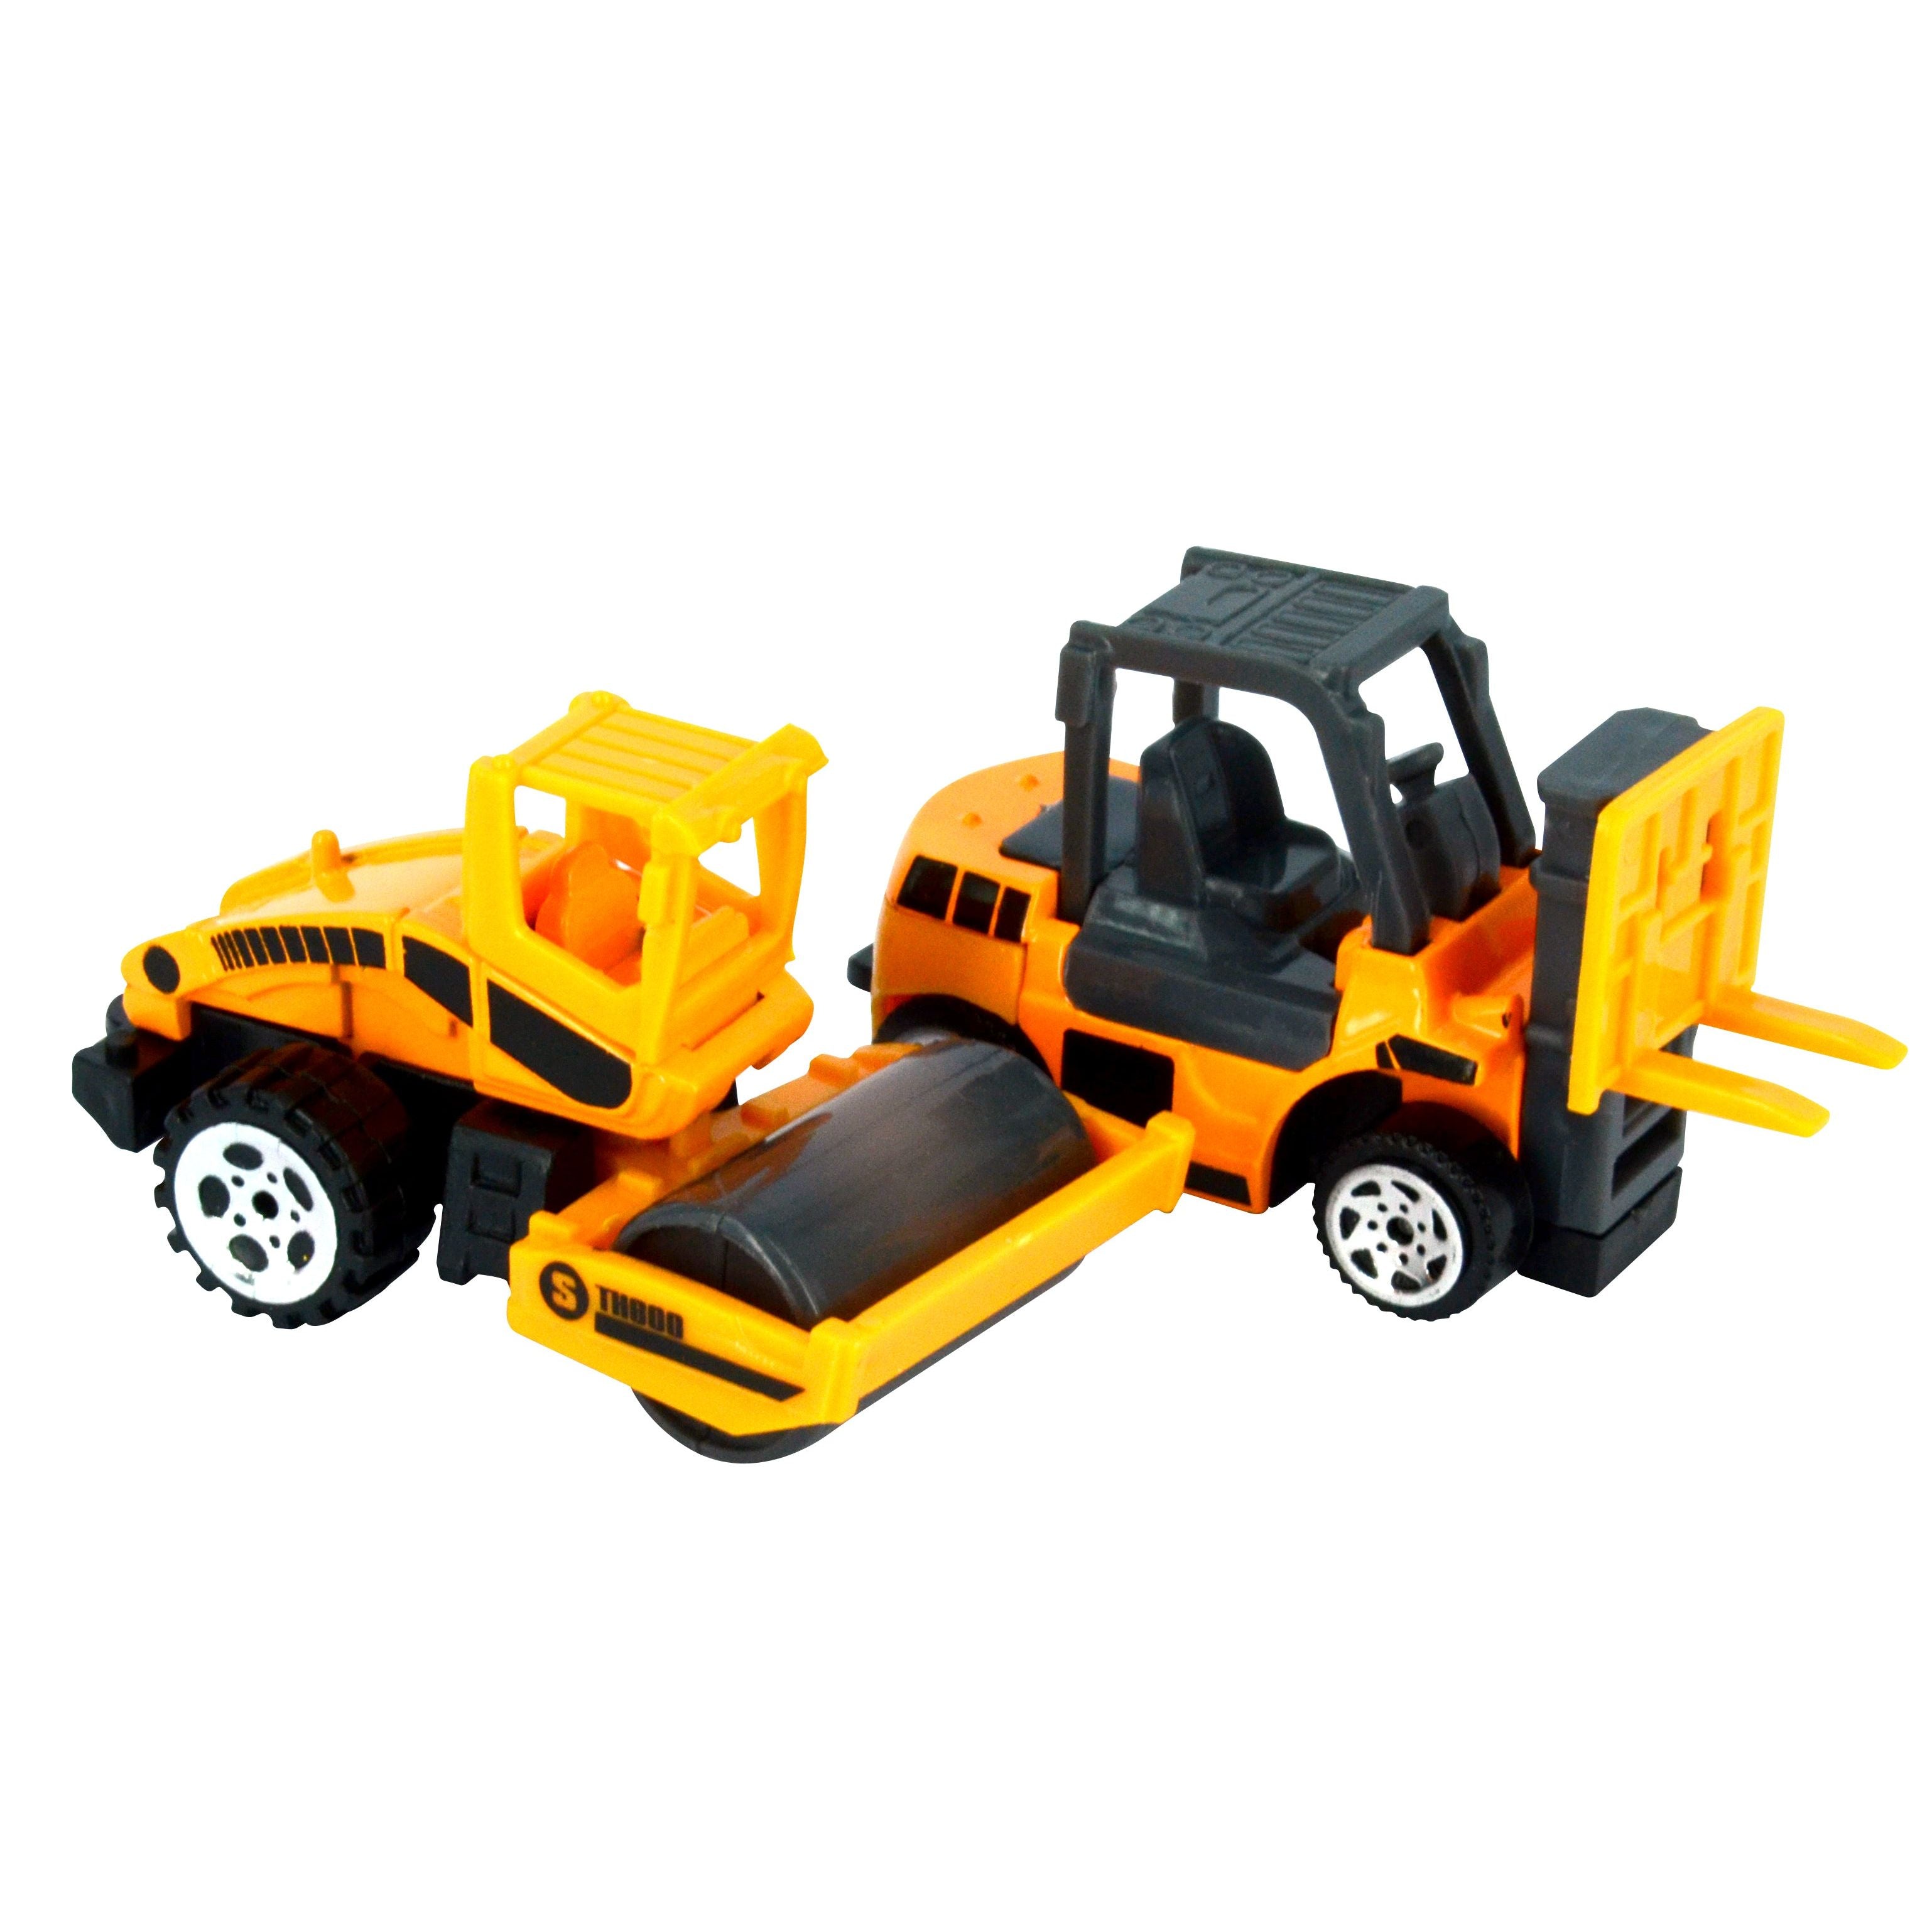 Die Cast Construction Truck - Dollars and Sense